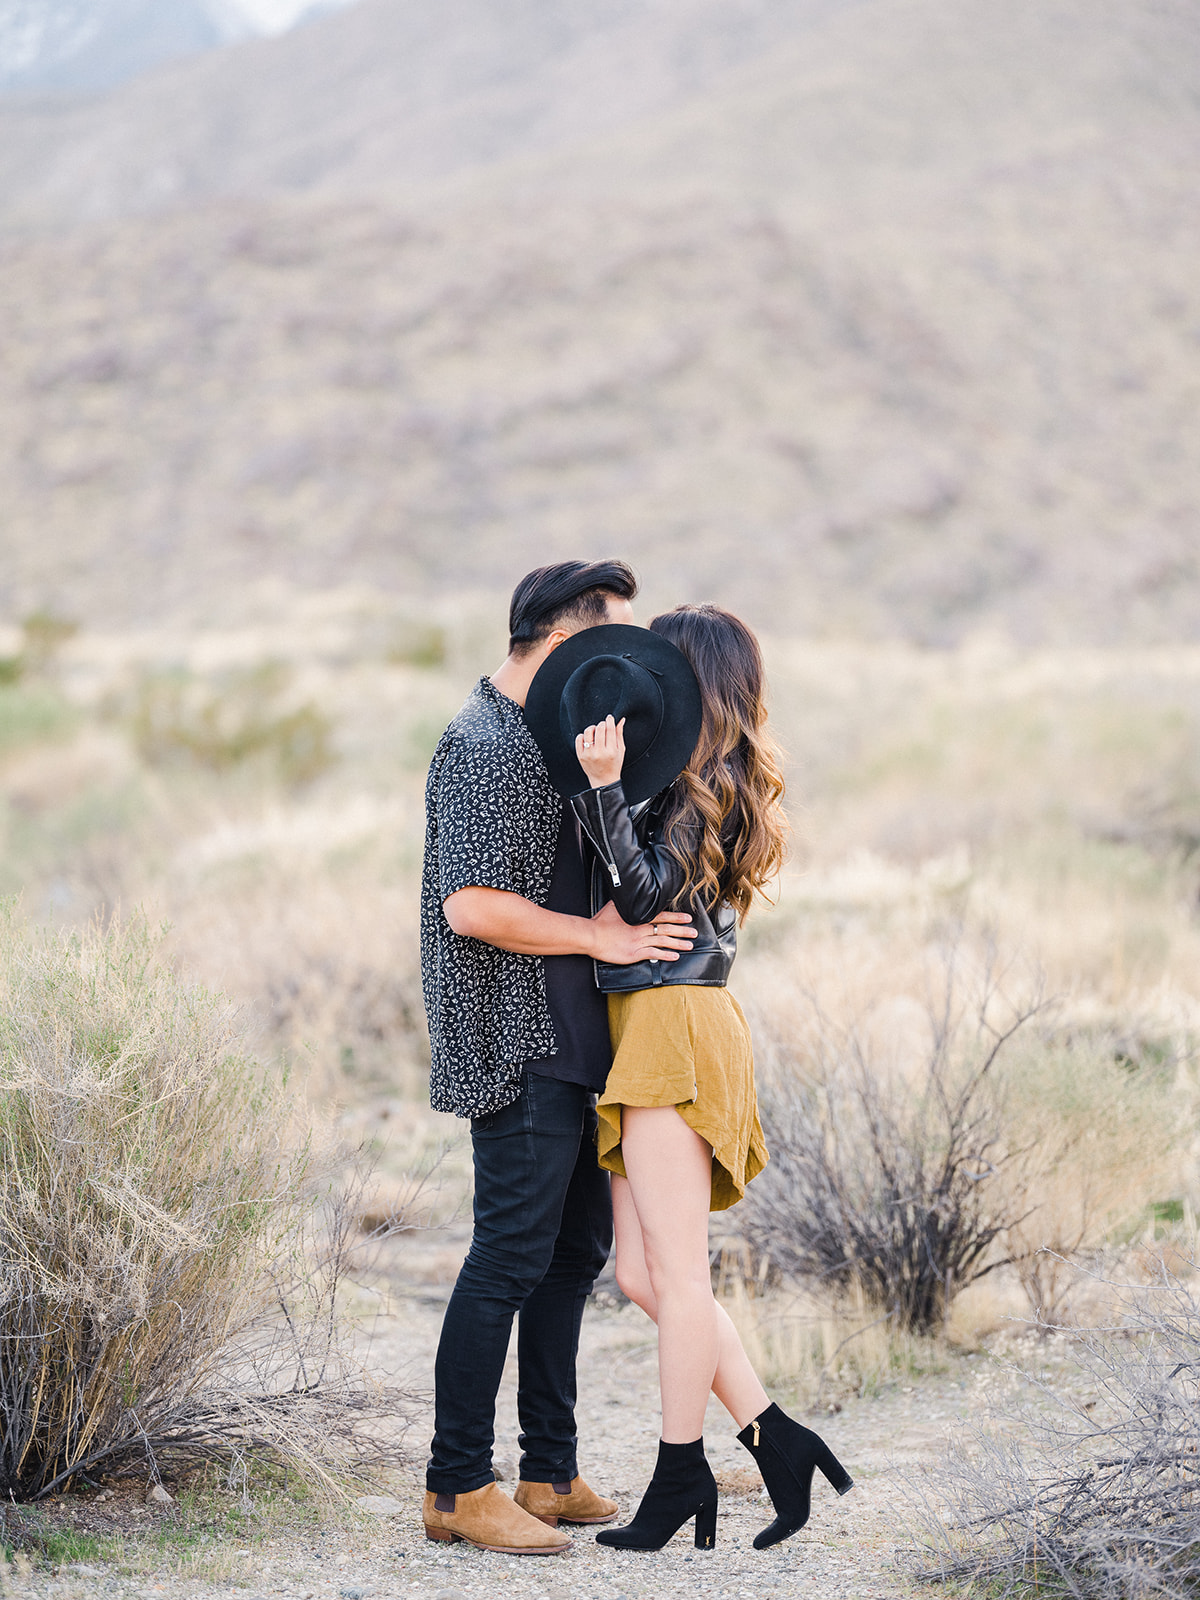 Best Engagement Photo Locations in Los Angeles - Palm Springs